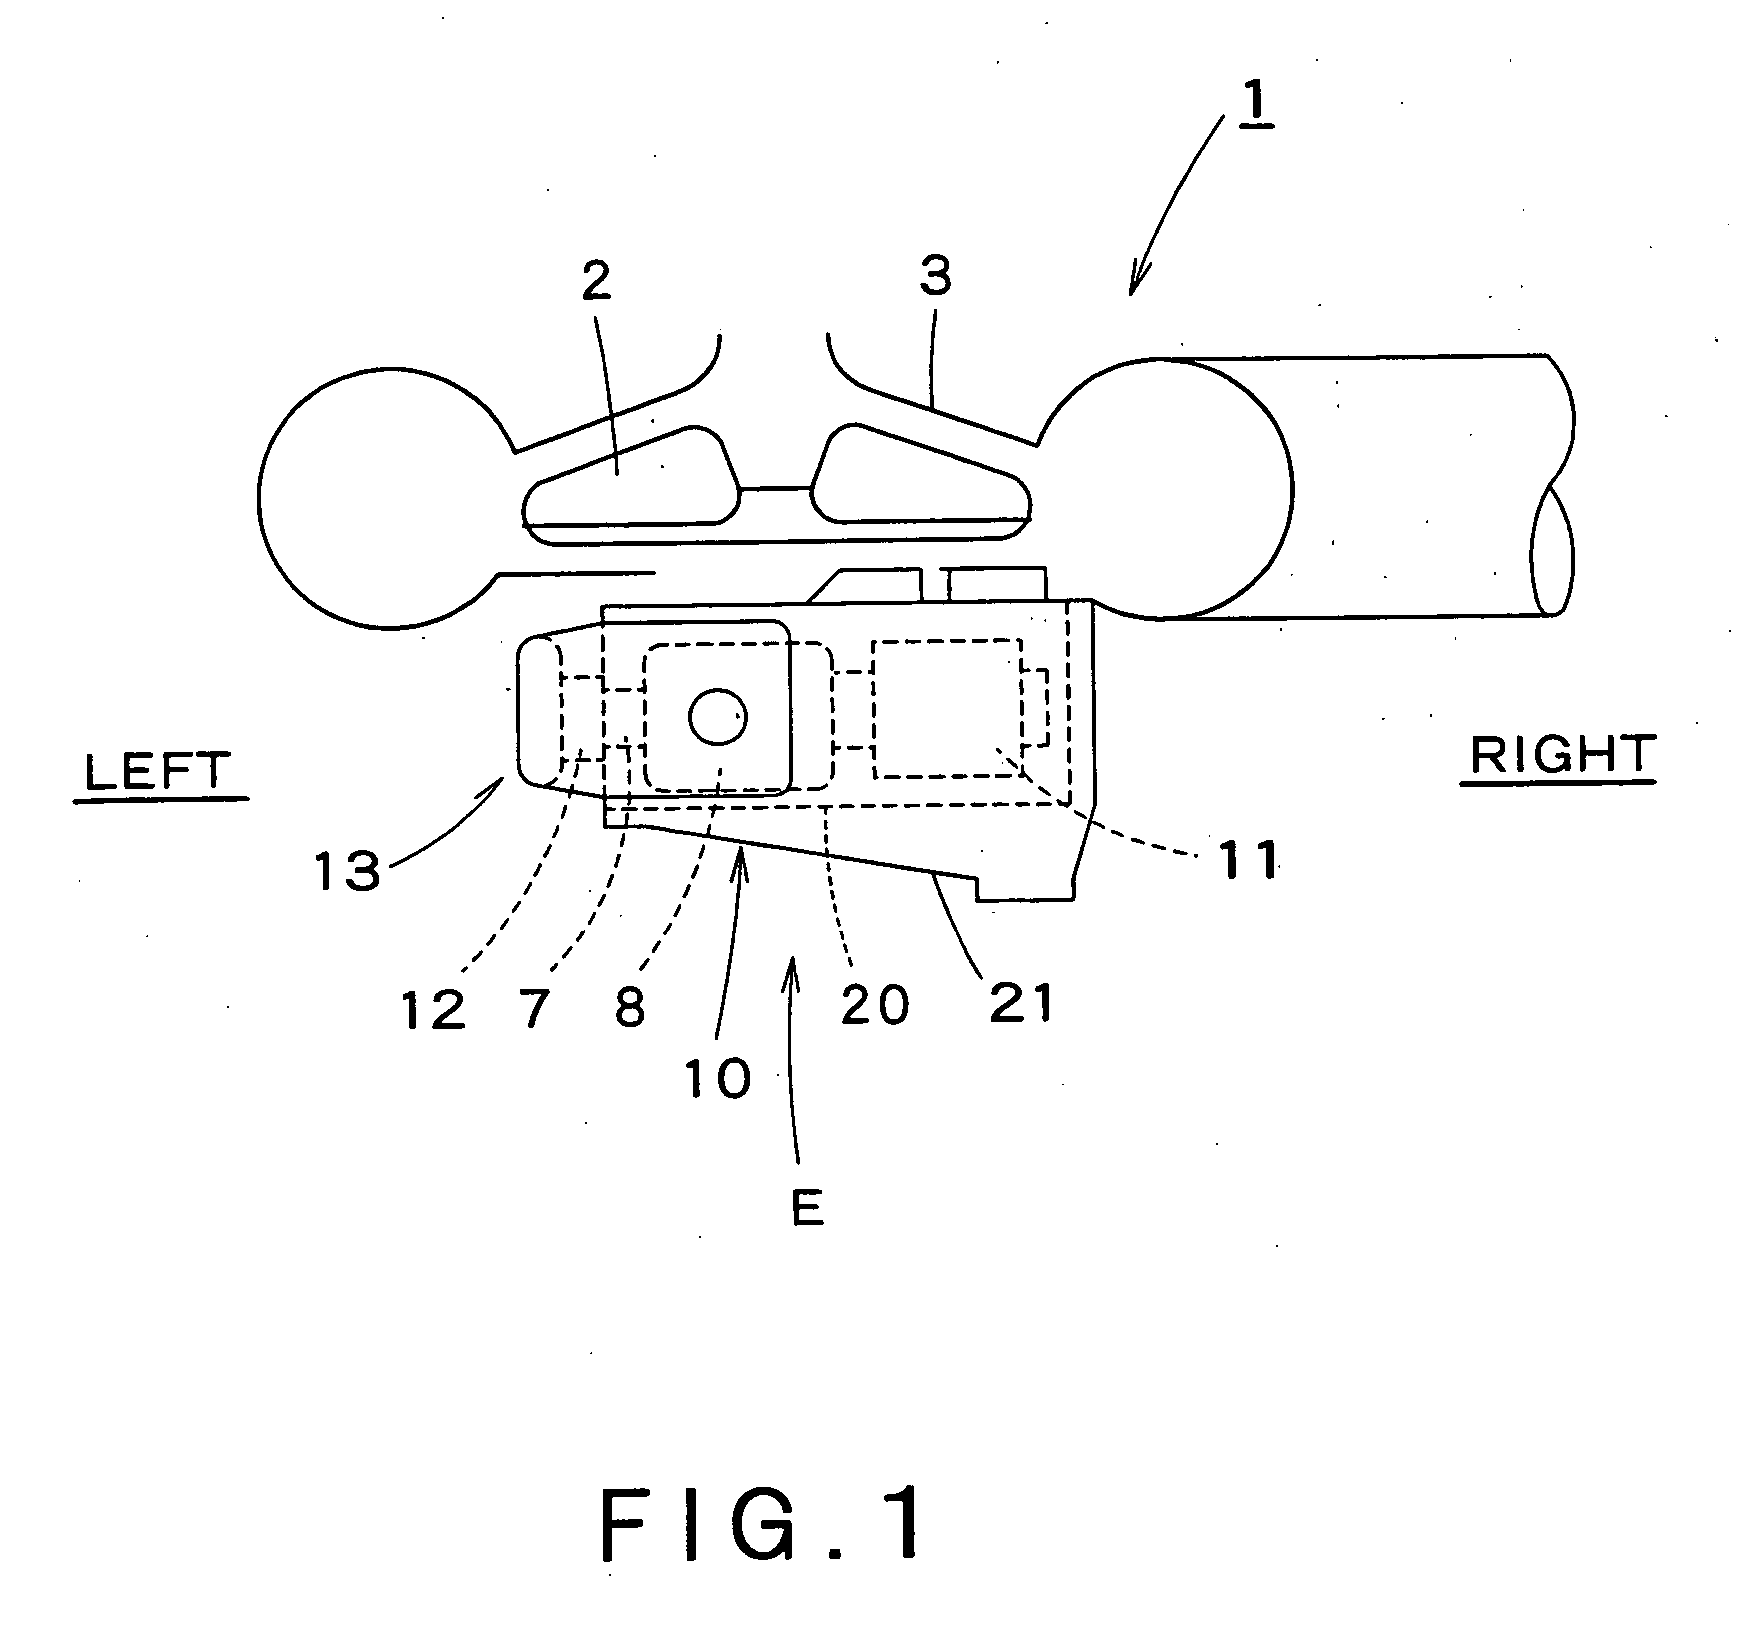 Air cleaner for portable engine